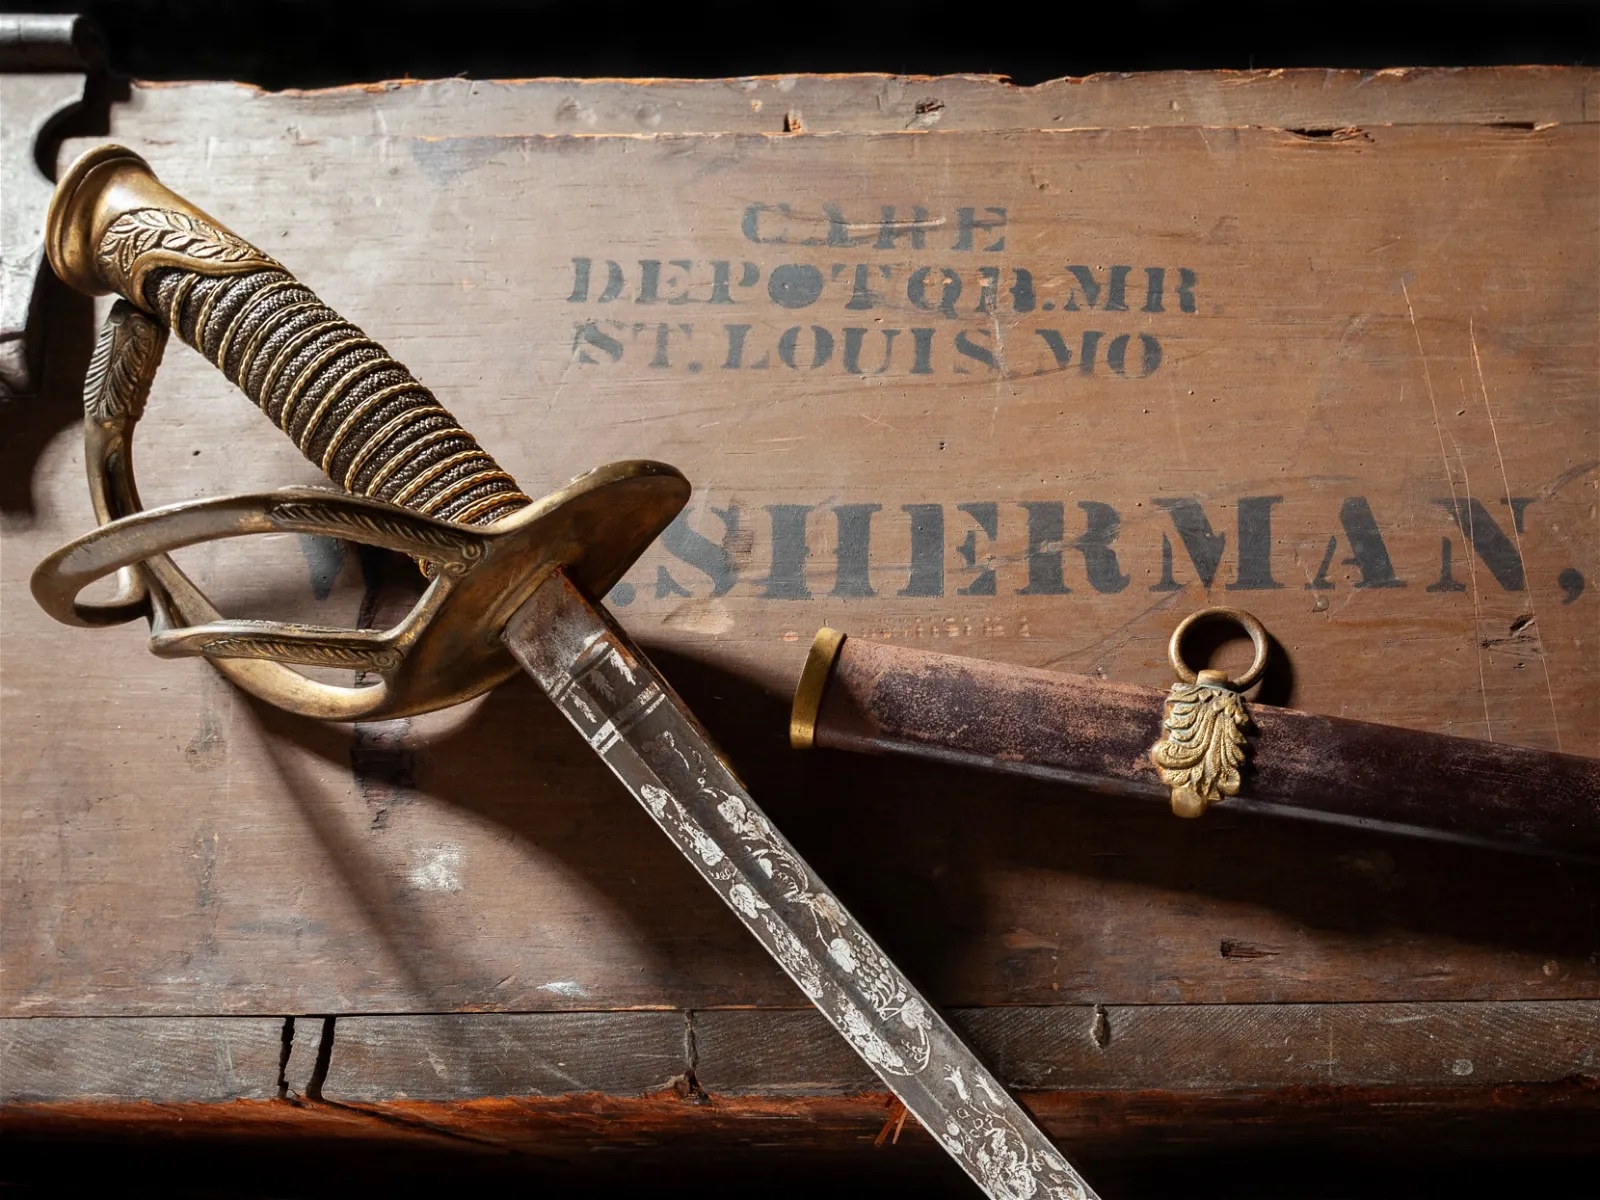 Gen. W. T. Sherman's battle-used sword and trunk, estimated at $40,000-$60,000 at Fleischer's.